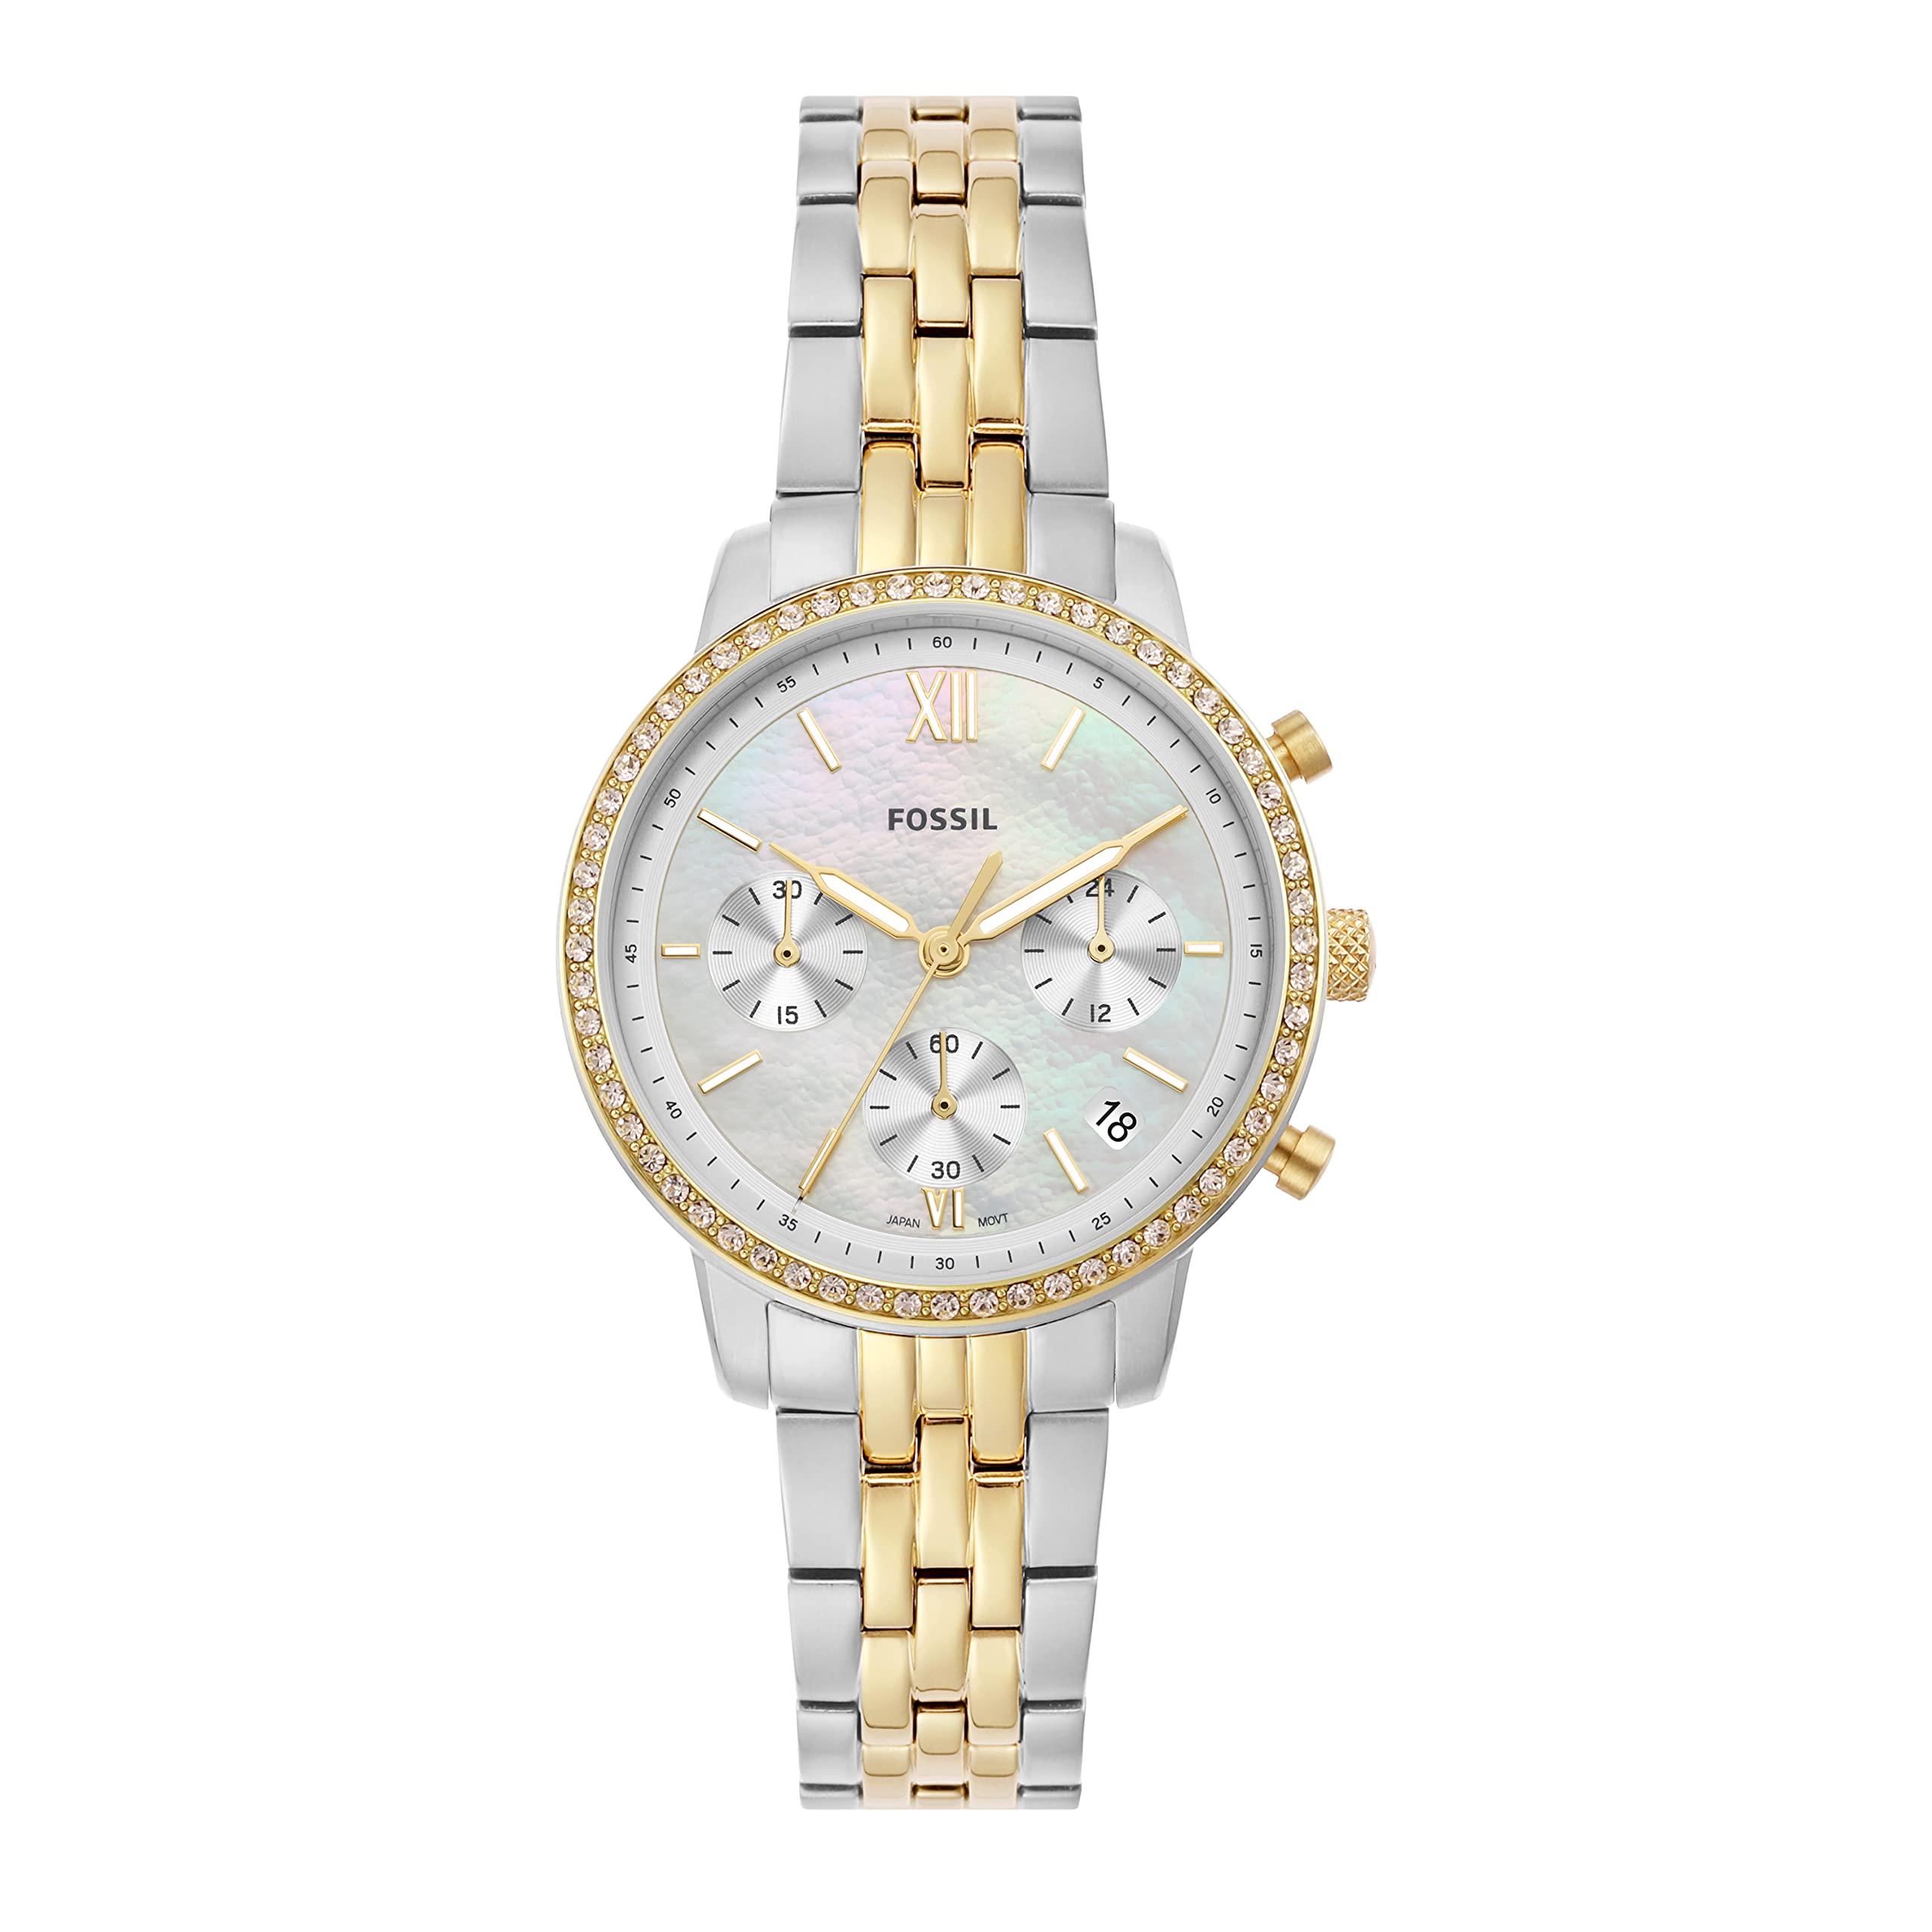 Fossil Womens Neutra Quartz Stainless Steel Chronograph Watch Color GoldSilver Model ES5216